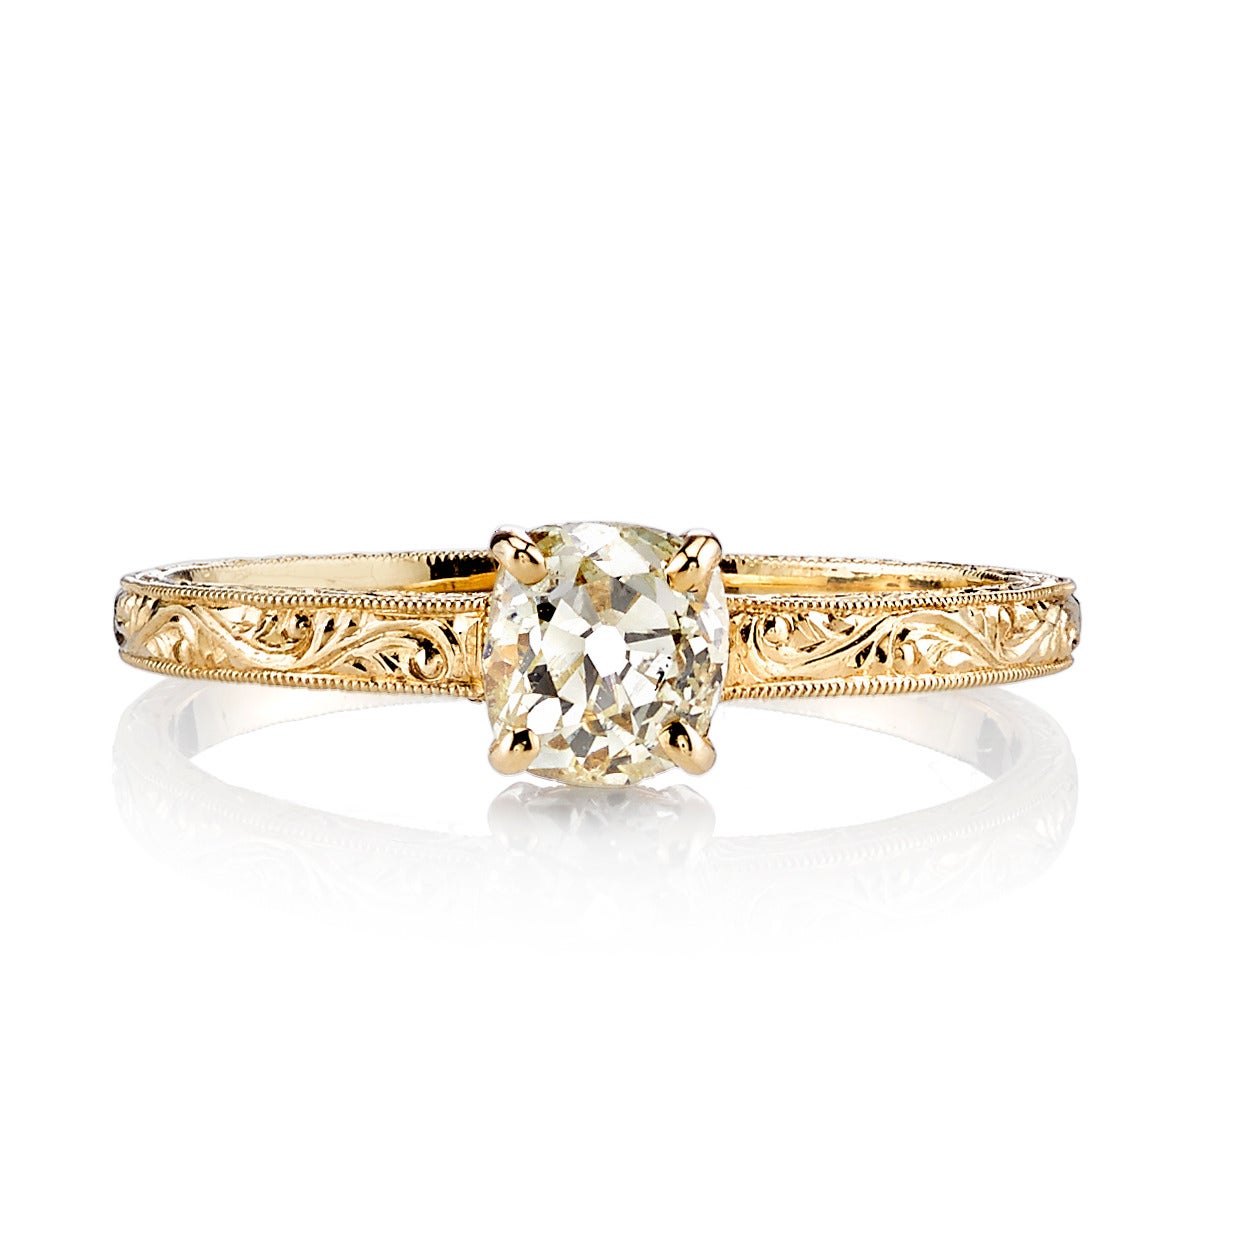 0.60ct Fancy Yellow/VS vintage Cushion cut diamond set in a handcrafted 18K yellow gold mounting. A classic Edwardian design that features hand engraving.